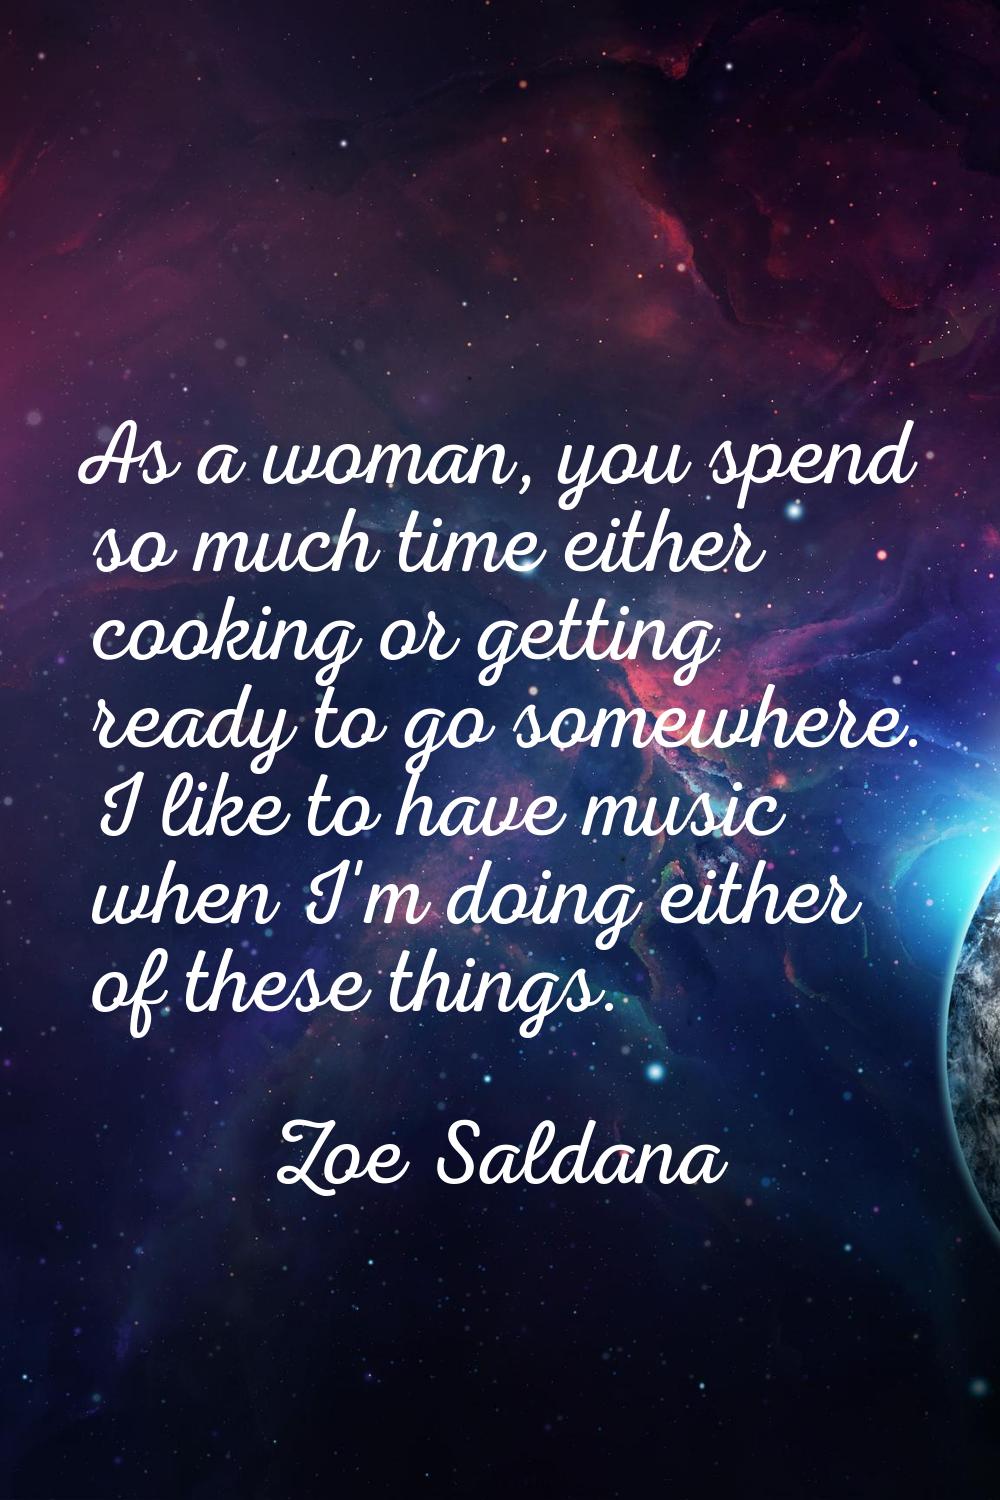 As a woman, you spend so much time either cooking or getting ready to go somewhere. I like to have 